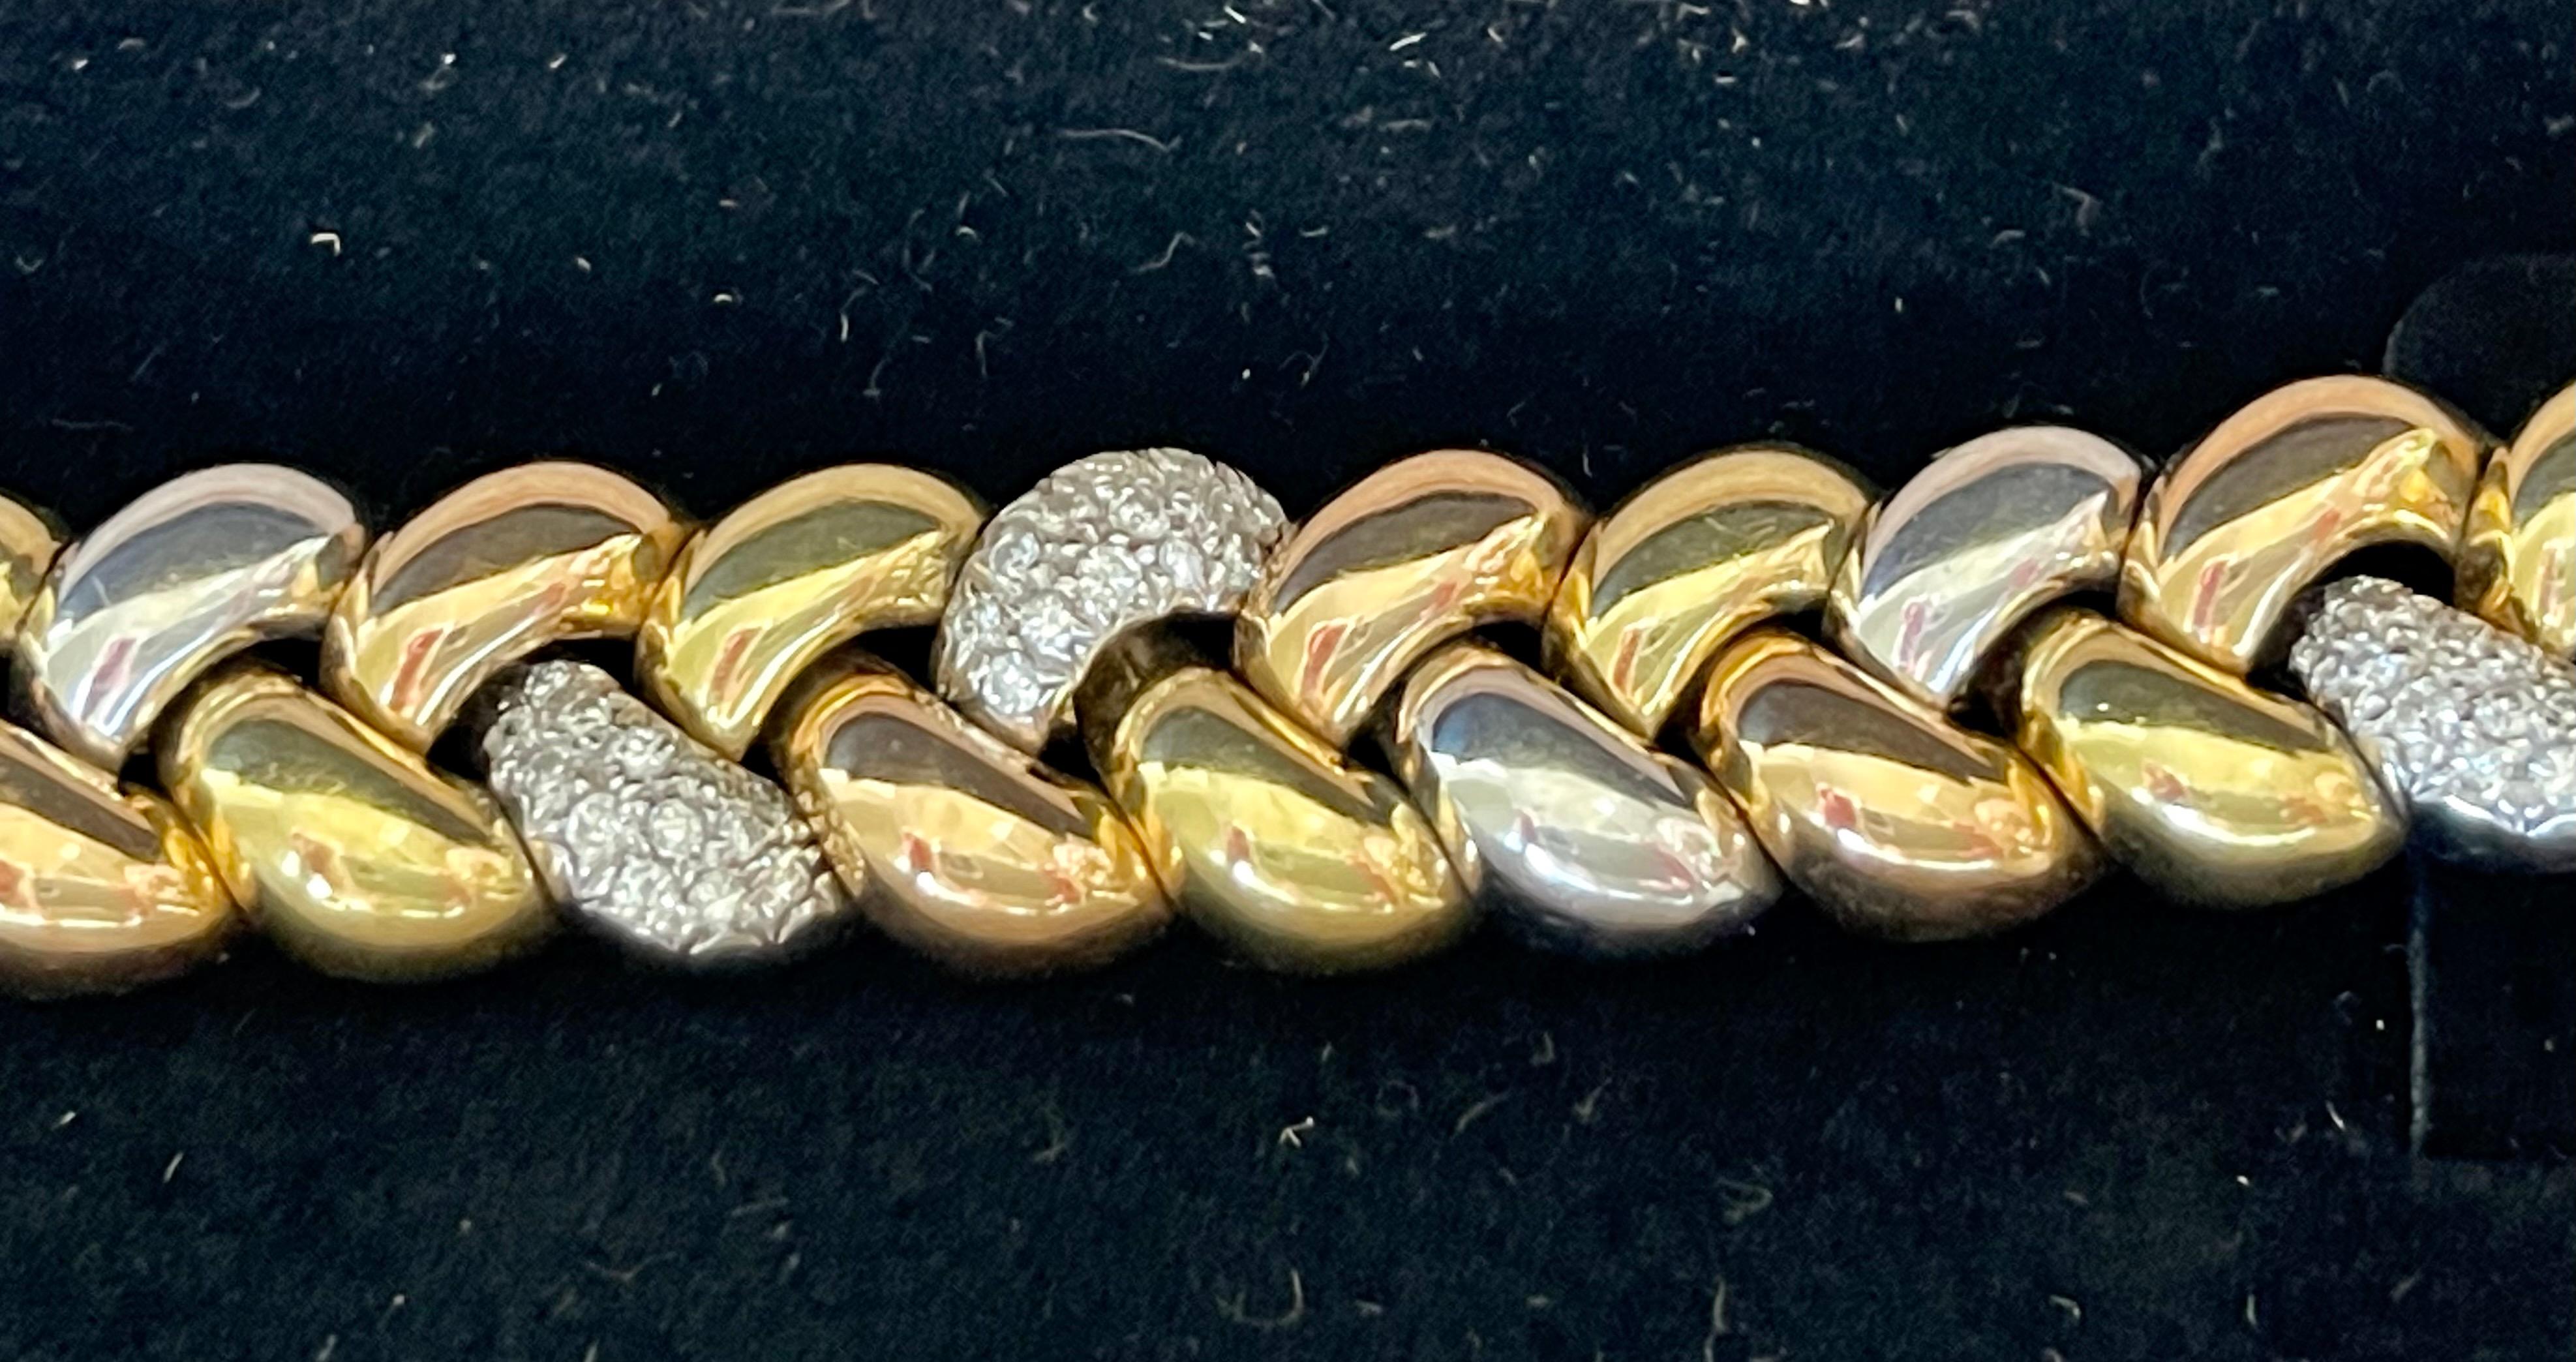 18 K tricolor Diamond Bracelet signed by Poiray Paris. Yellow Gold, pink Gold and white Gold.
Composed of entwined three colour gold curbs, 8 links pavé-set with brilliant-cut diamonds, French assay marks and concealed clasp, by Poiray Paris.